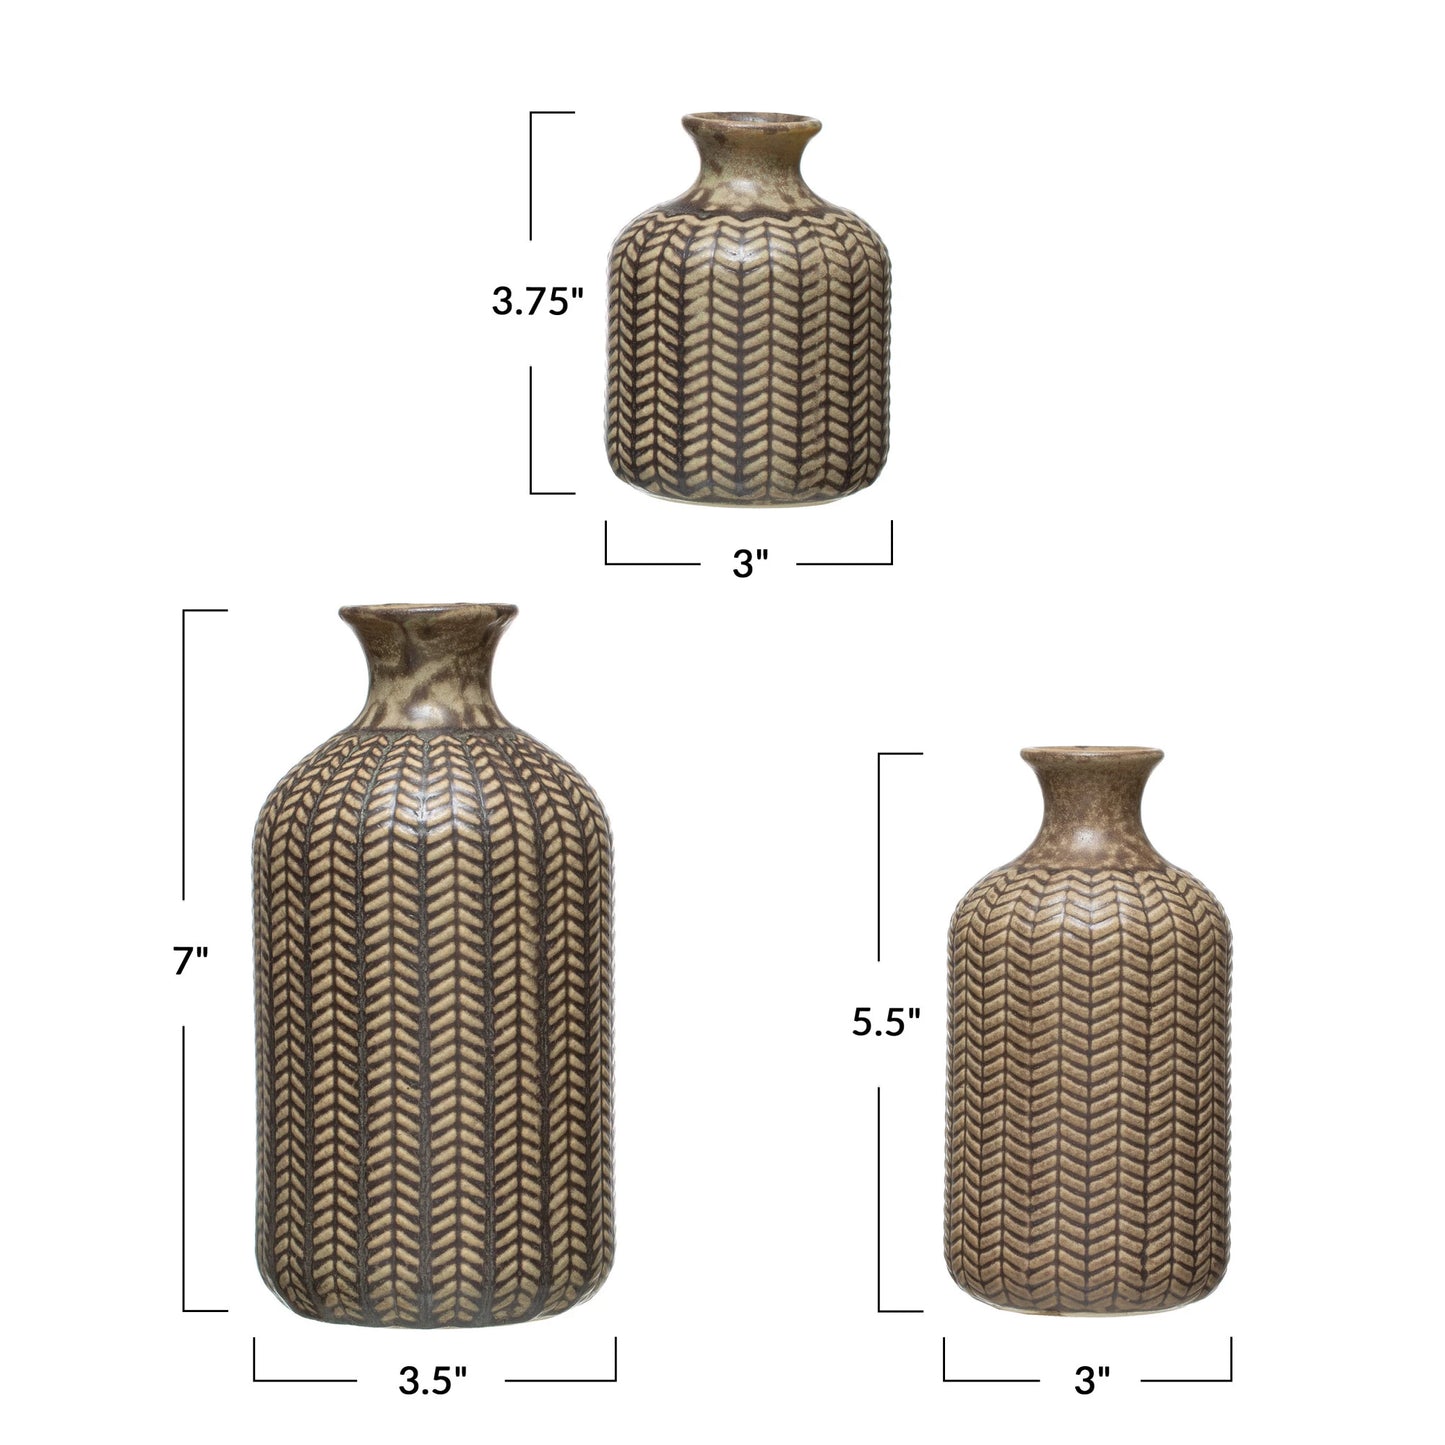 3 sizes of Embossed Stoneware Vases with measurements..